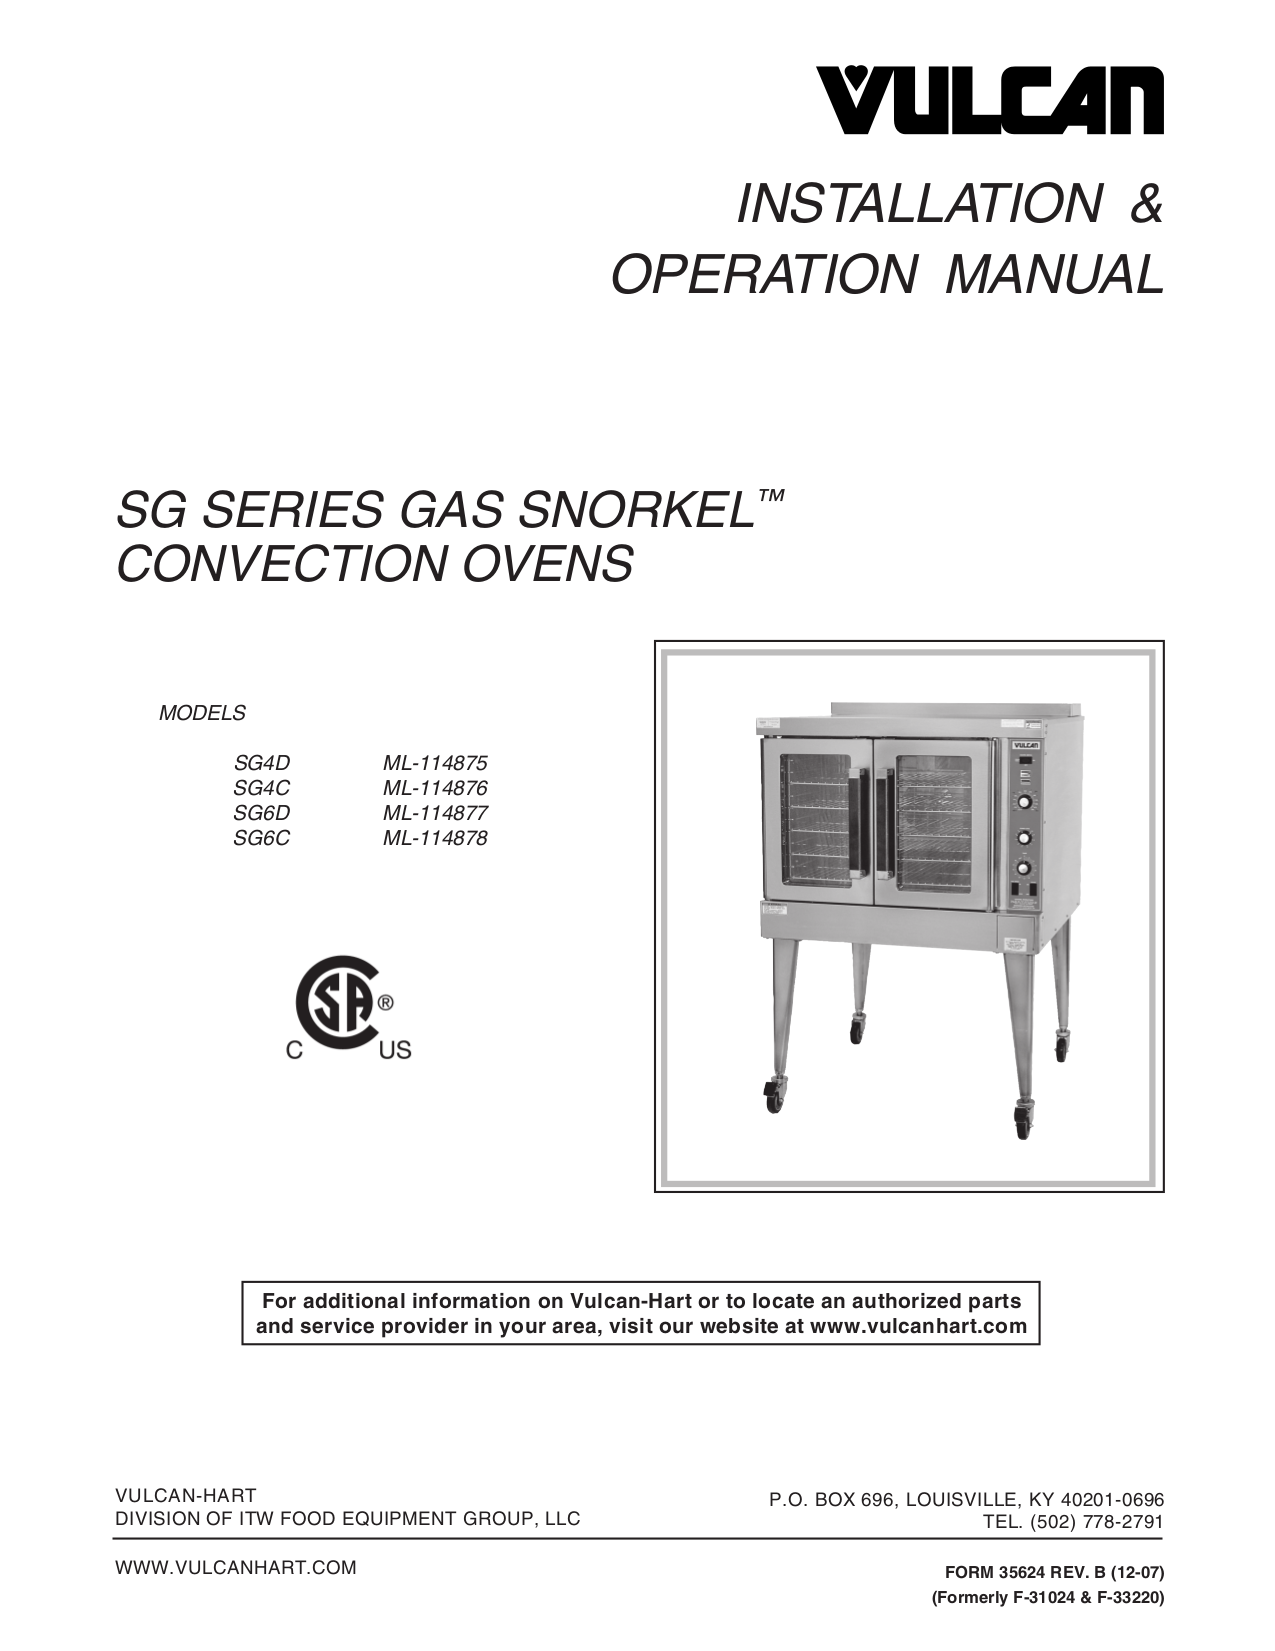 How To Light A Gas Oven Manually Manage Music And Videos